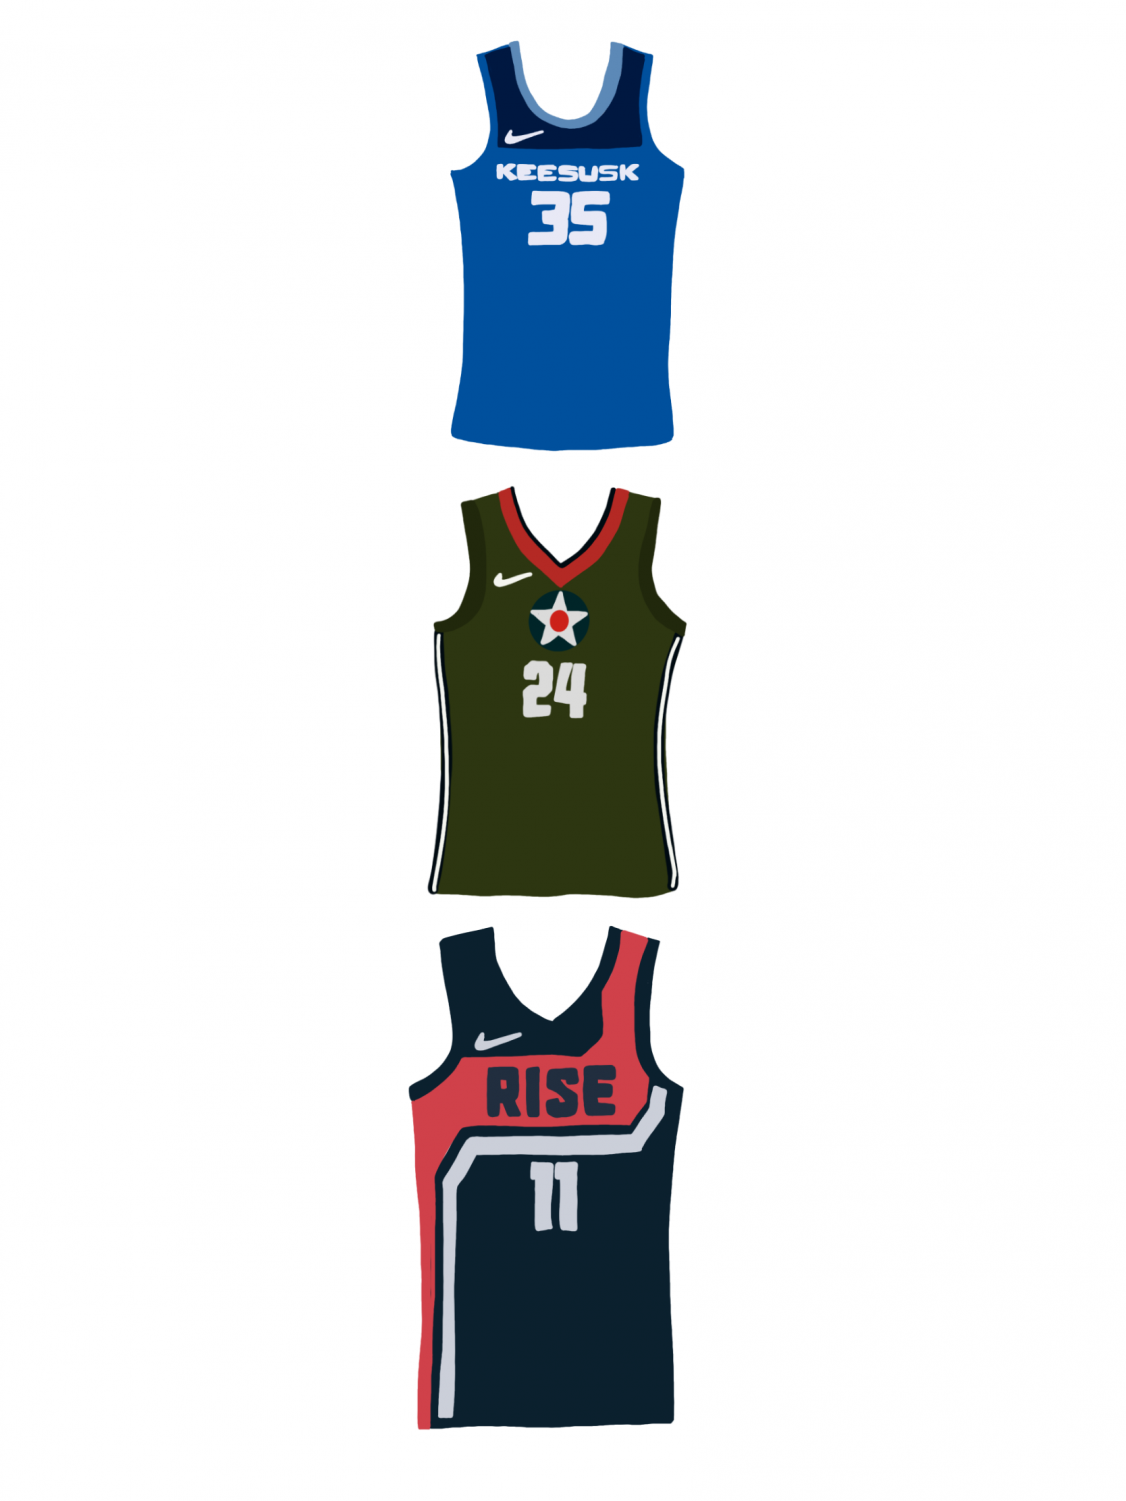 Rebel Edition jerseys released by Nike bring WNBA cities to life - The Next